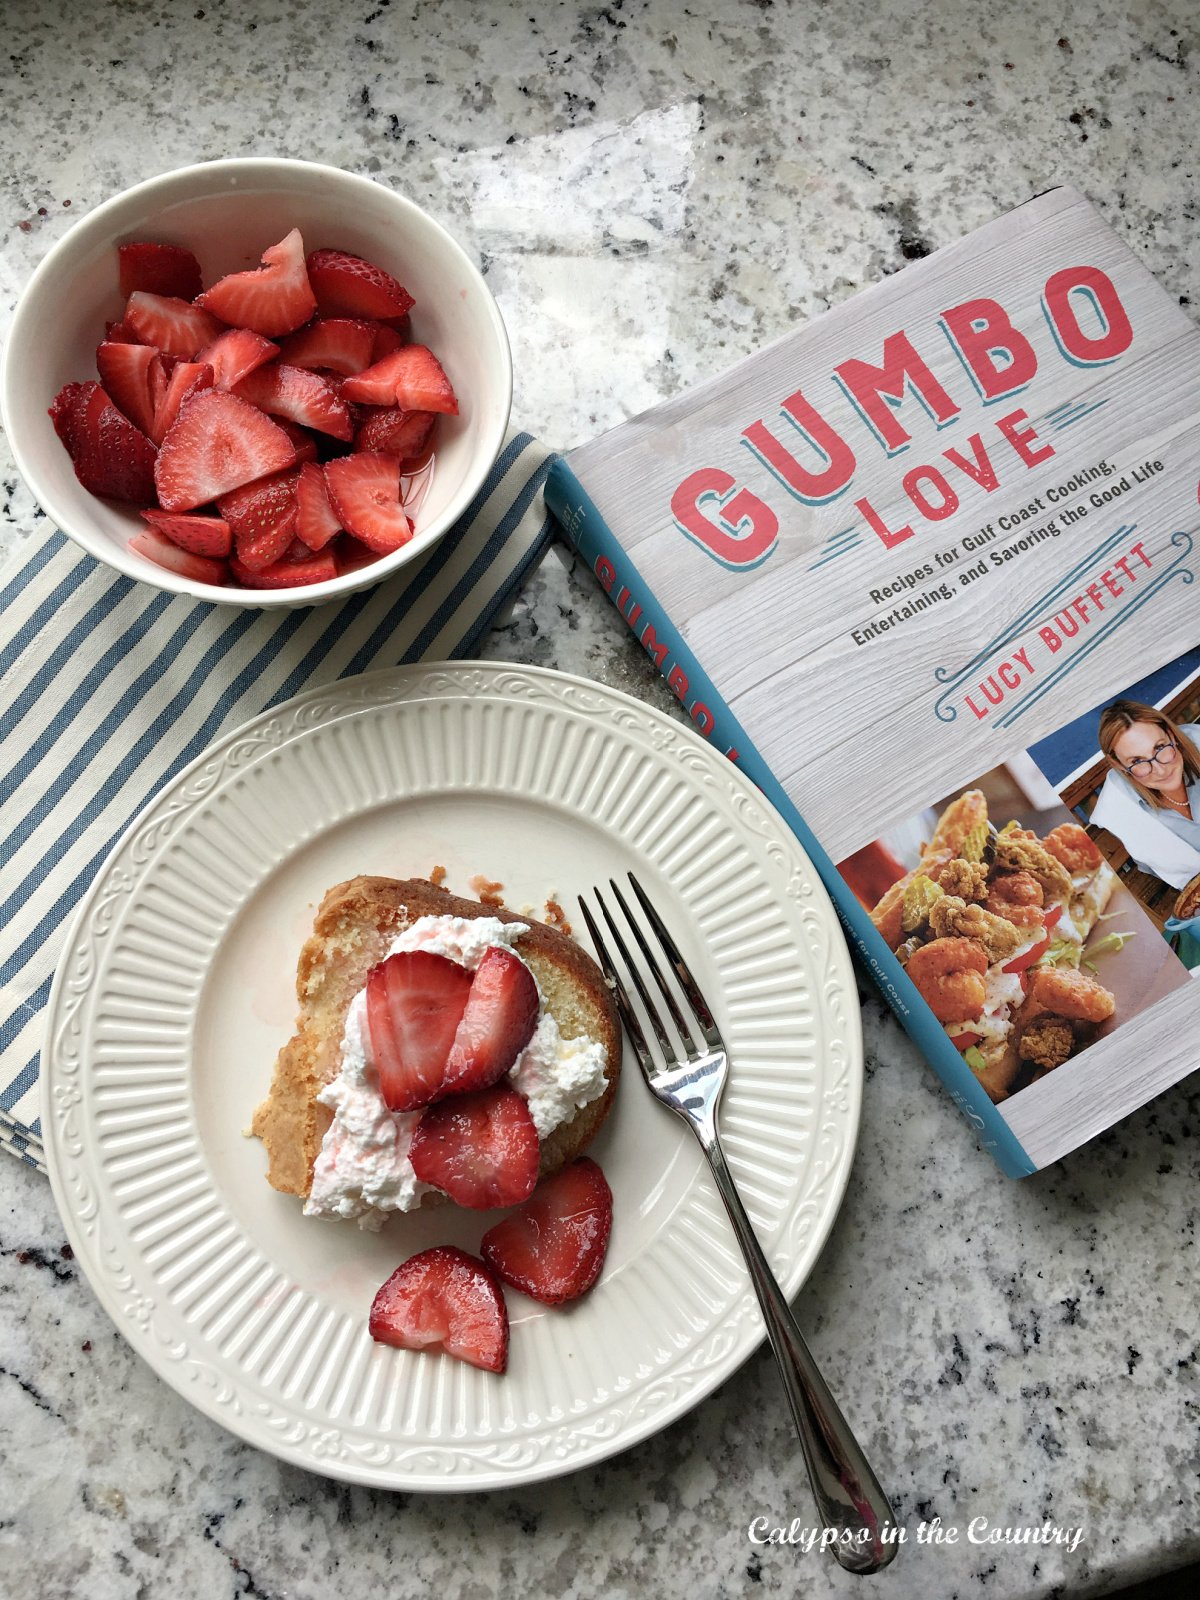 Gumbo Love Review and a Recipe From the Book!